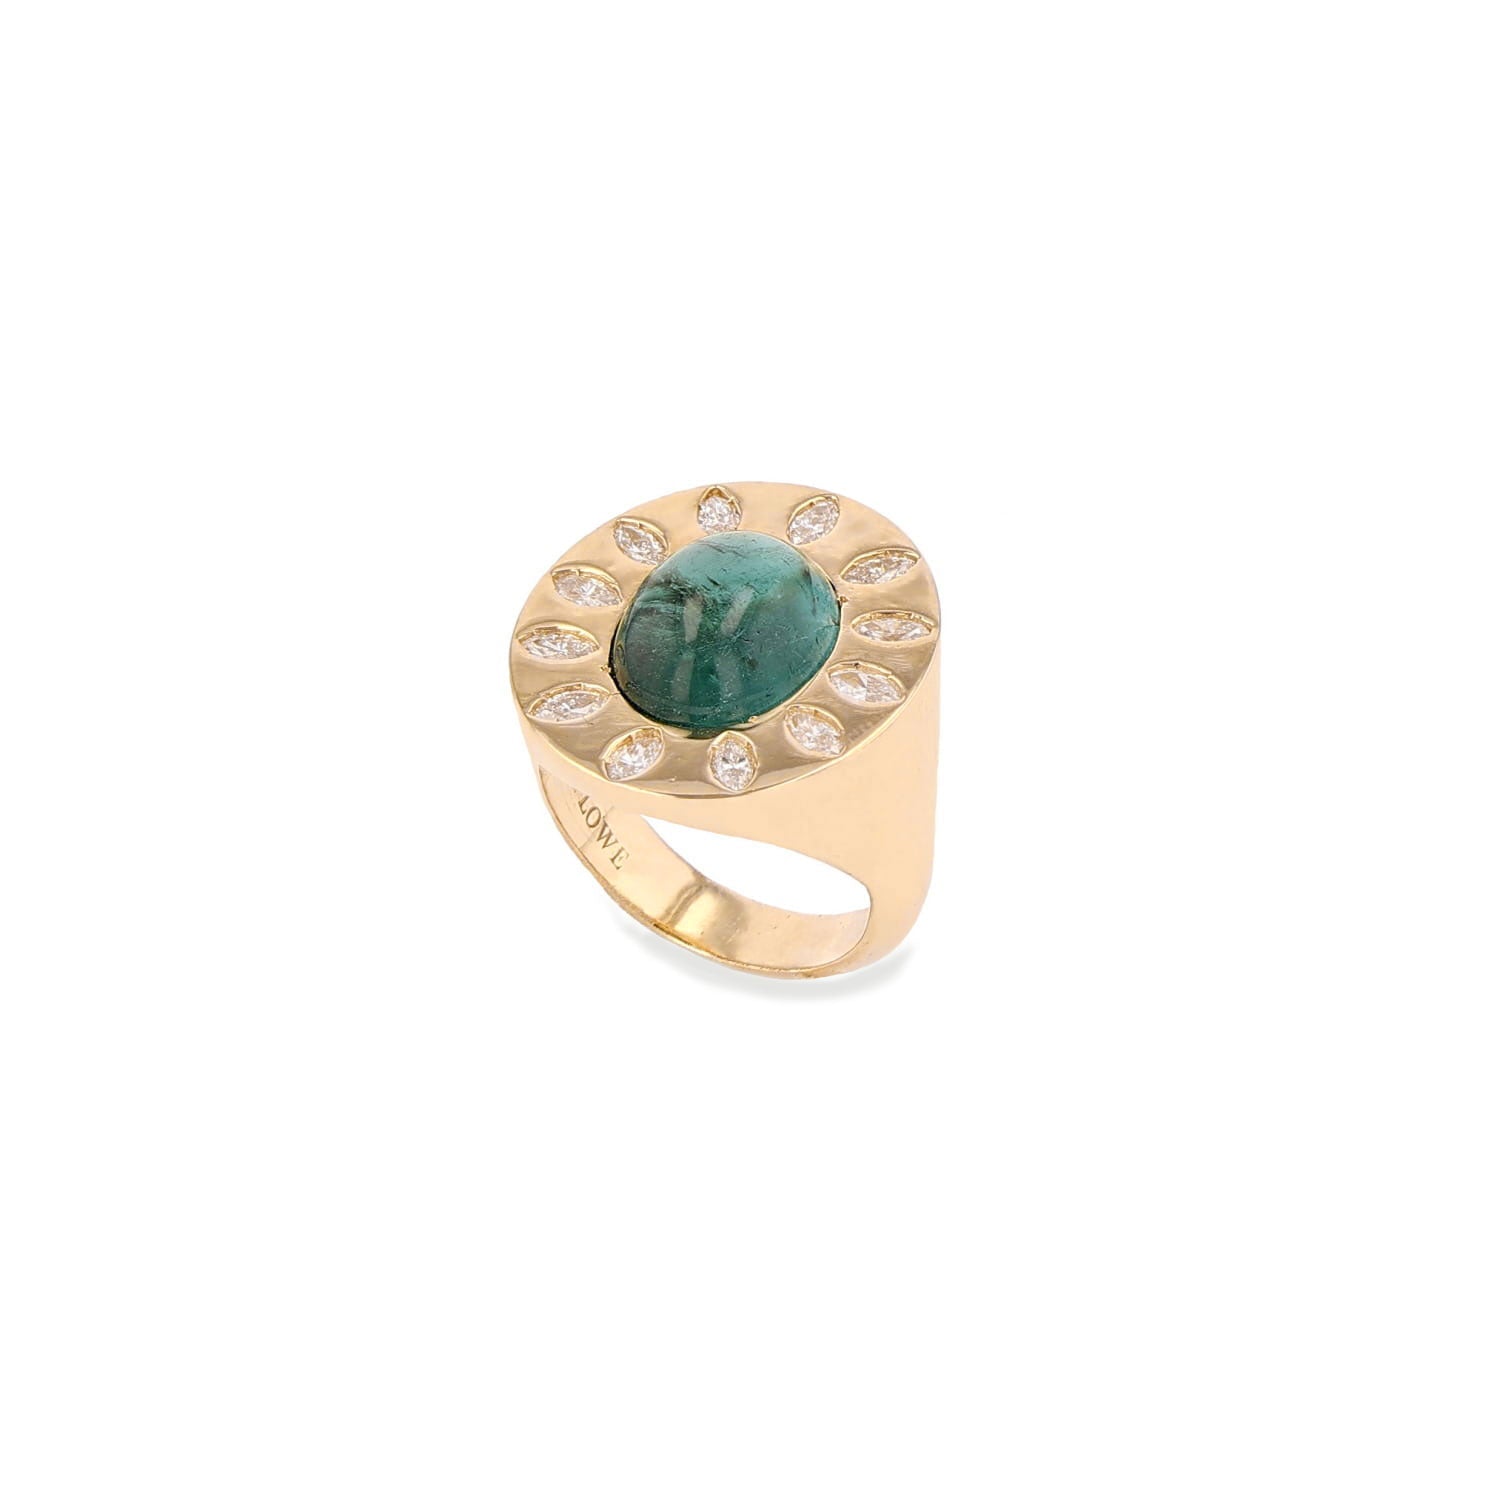 14k Teal Tourmaline Cabochon Ring with Marquis Diamond Flower  SRG058-8 - TBird